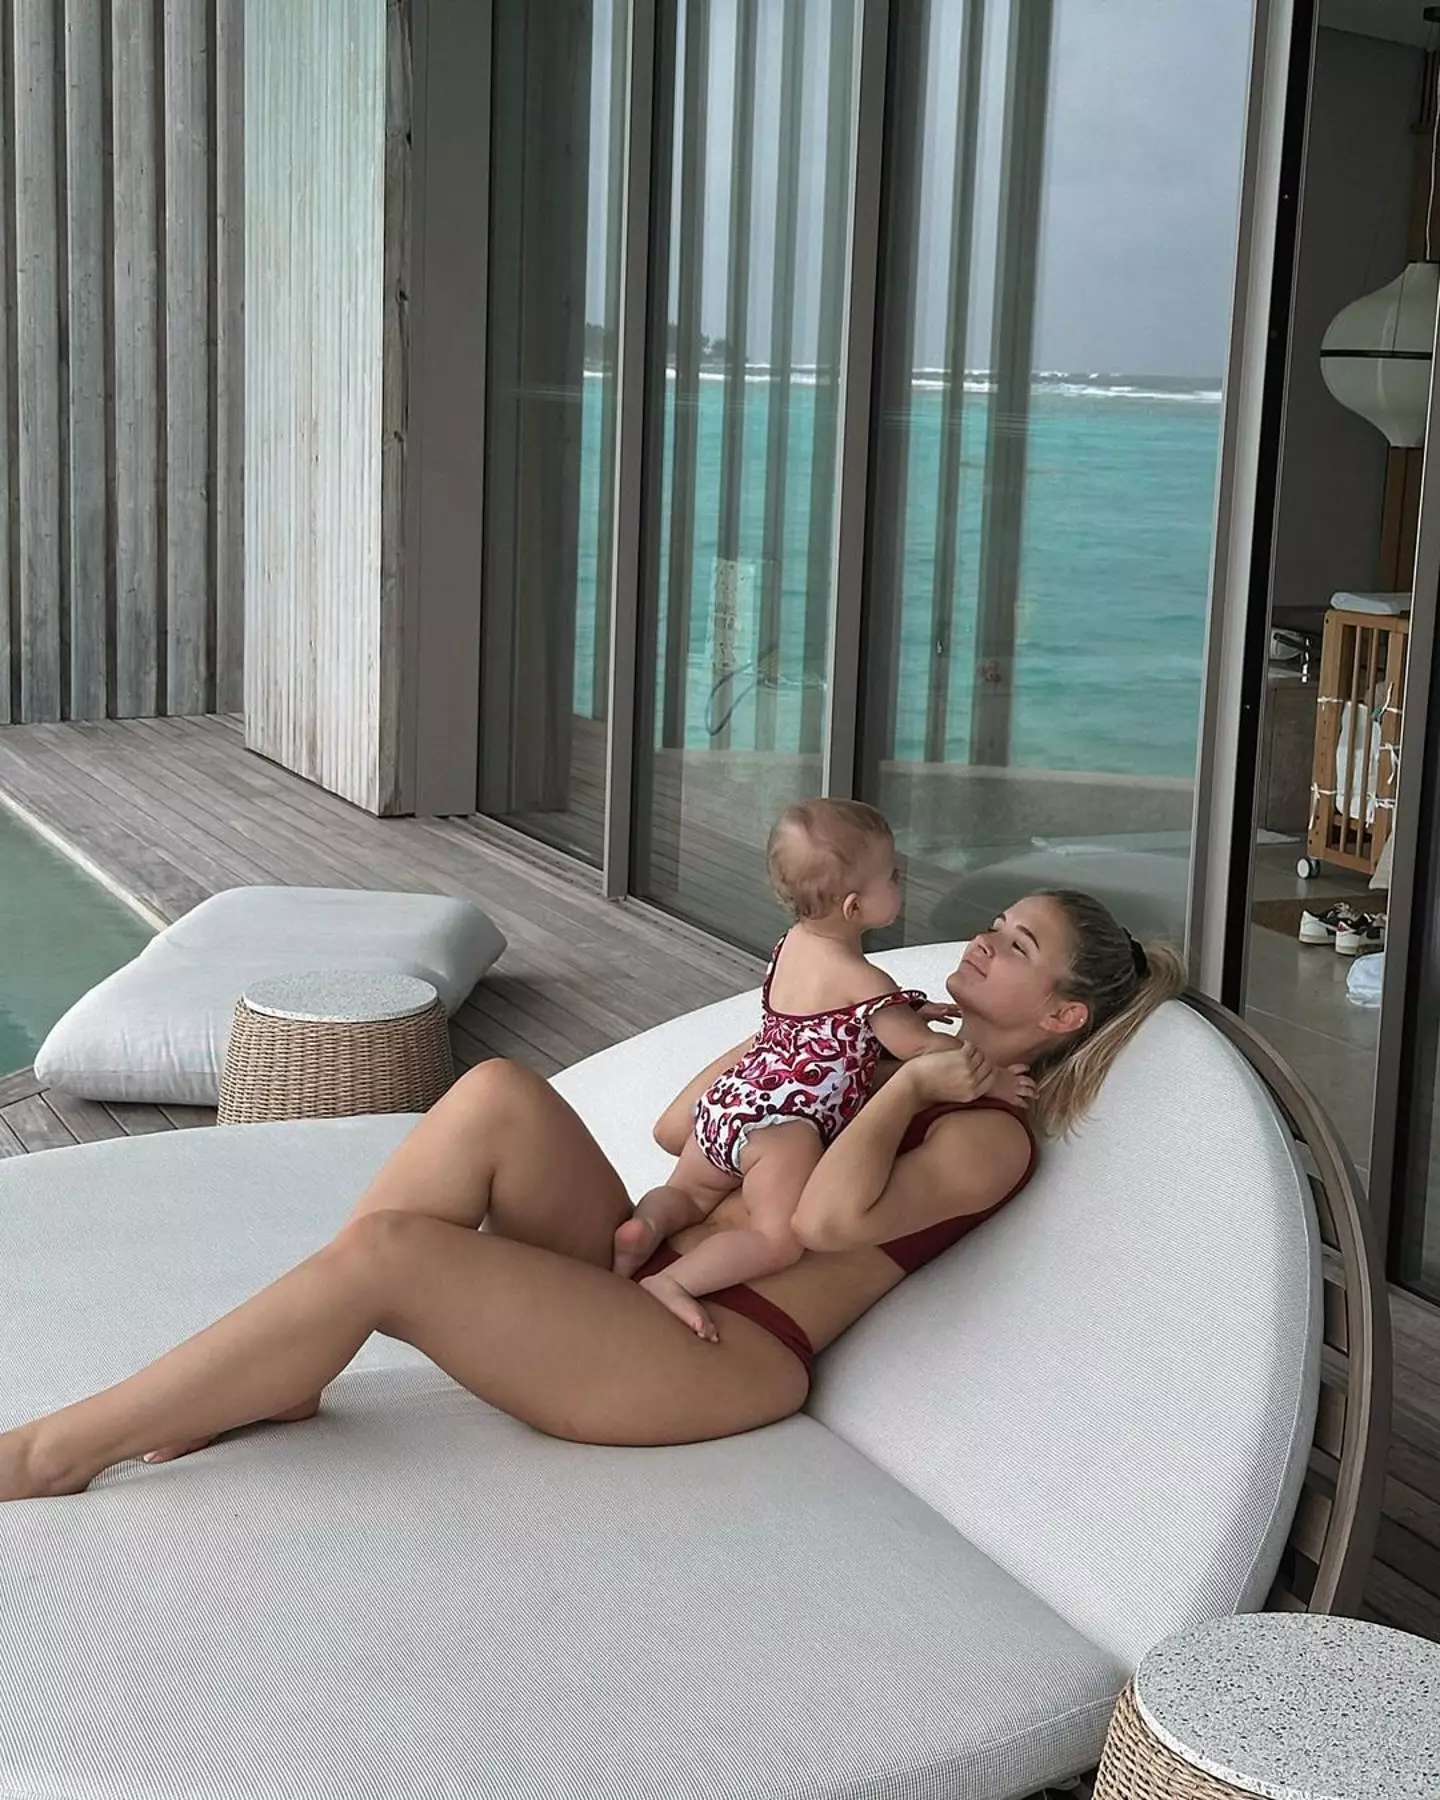 The family-of-three enjoyed a trip to the Maldives.